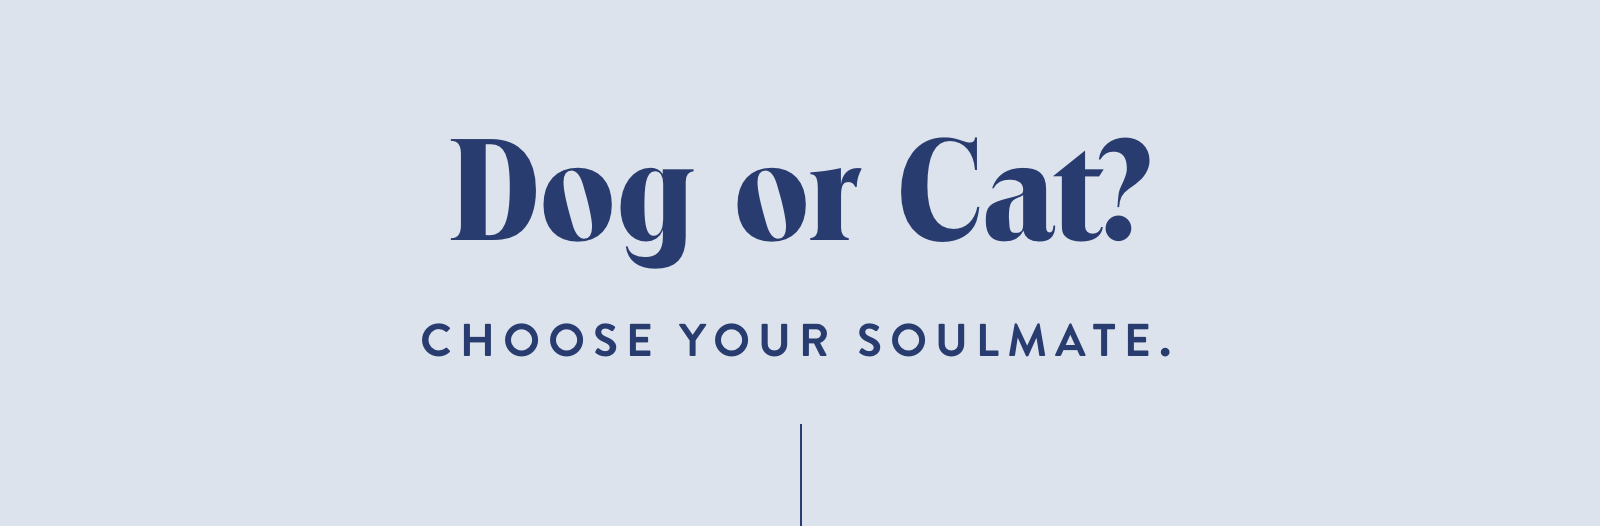 Dog or Cat? Choose your soulmate.